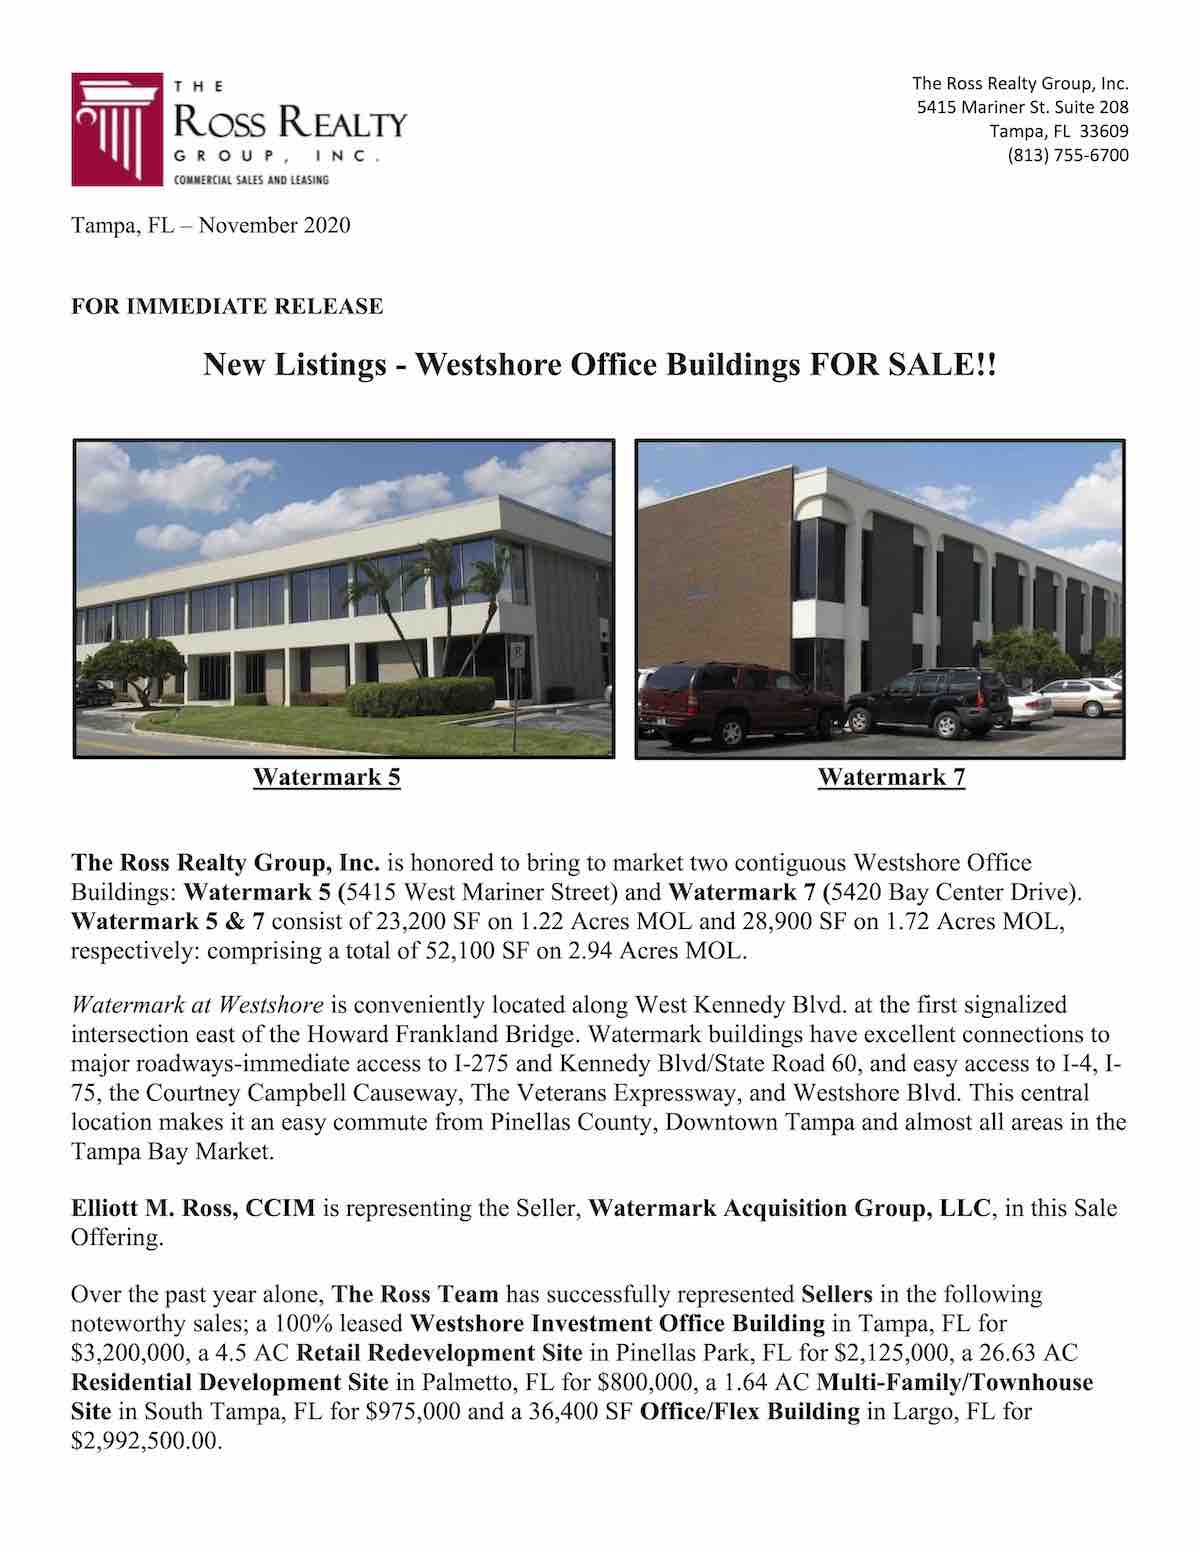 Tampa Commercial Real Estate - RRG-New Listing-Watermark 5 (5415 West Mariner Street) and Watermark 7 (5420 Bay Center Drive) P1